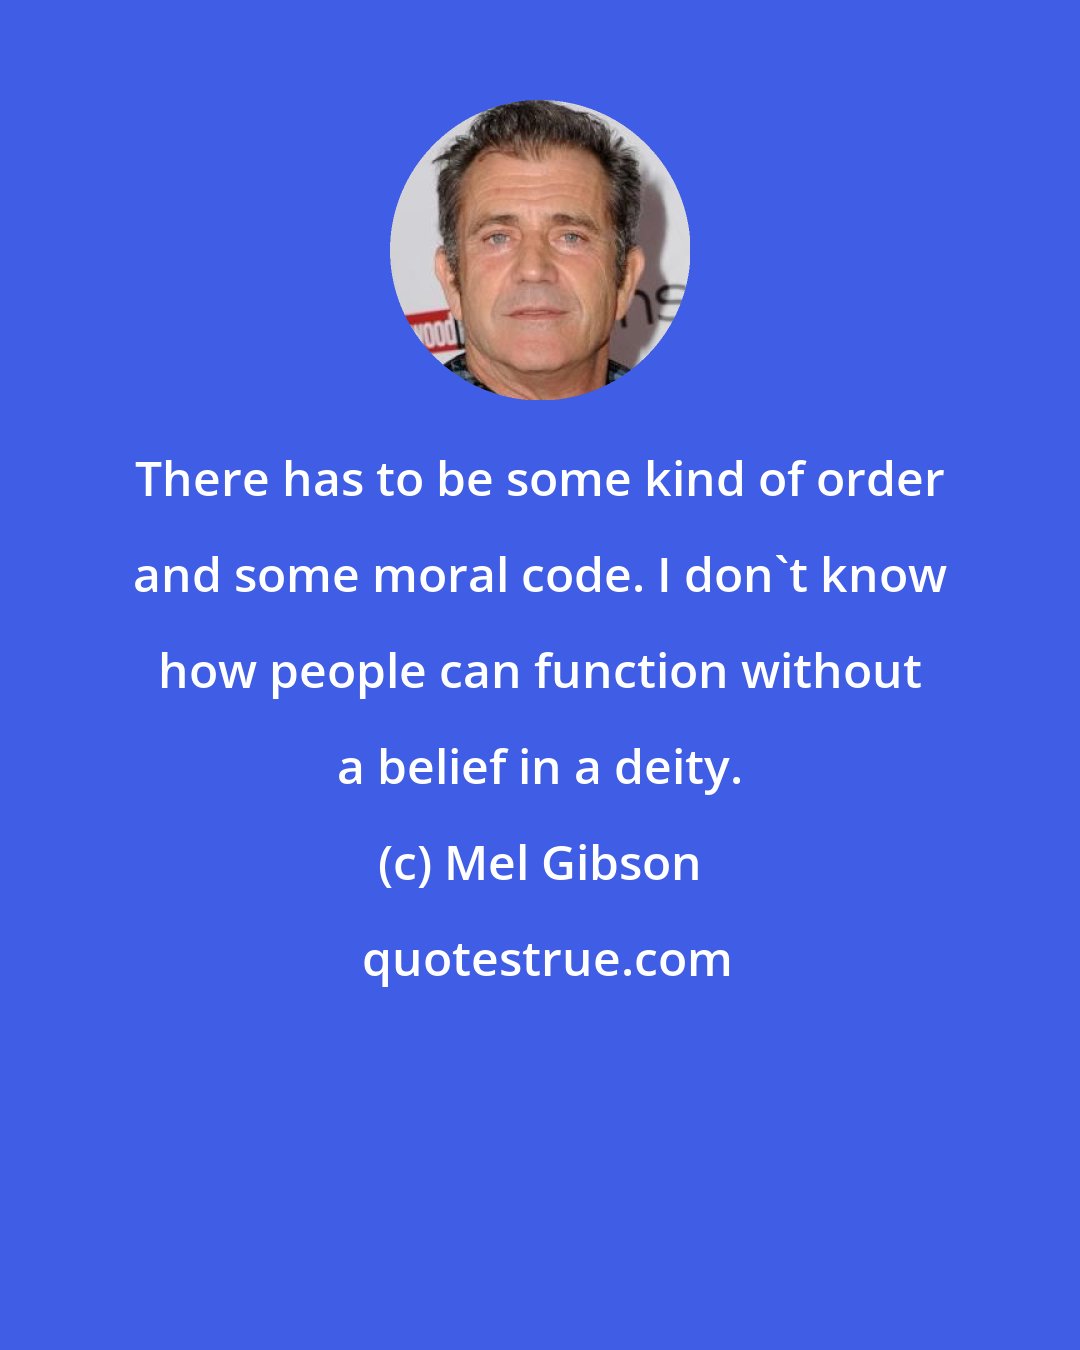 Mel Gibson: There has to be some kind of order and some moral code. I don't know how people can function without a belief in a deity.